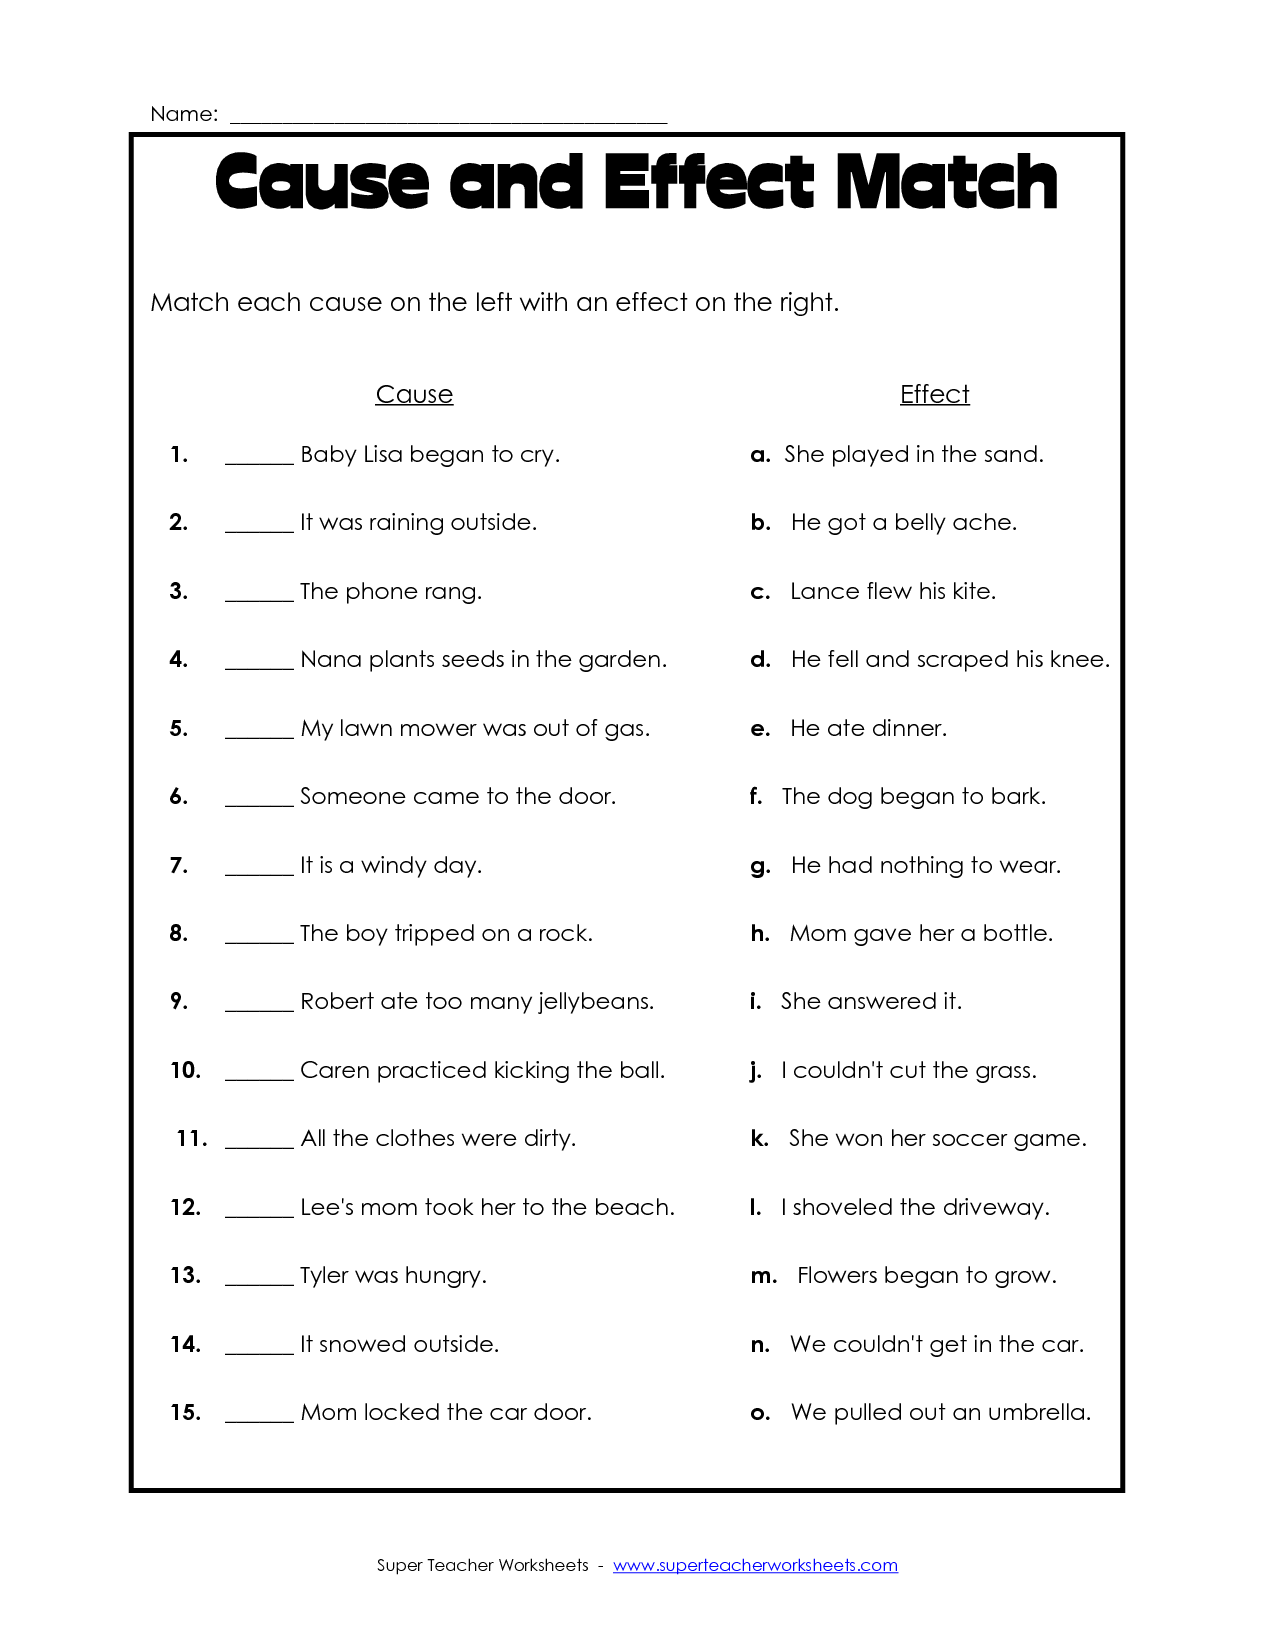 Cause and Effect Worksheets 2nd Grade Image